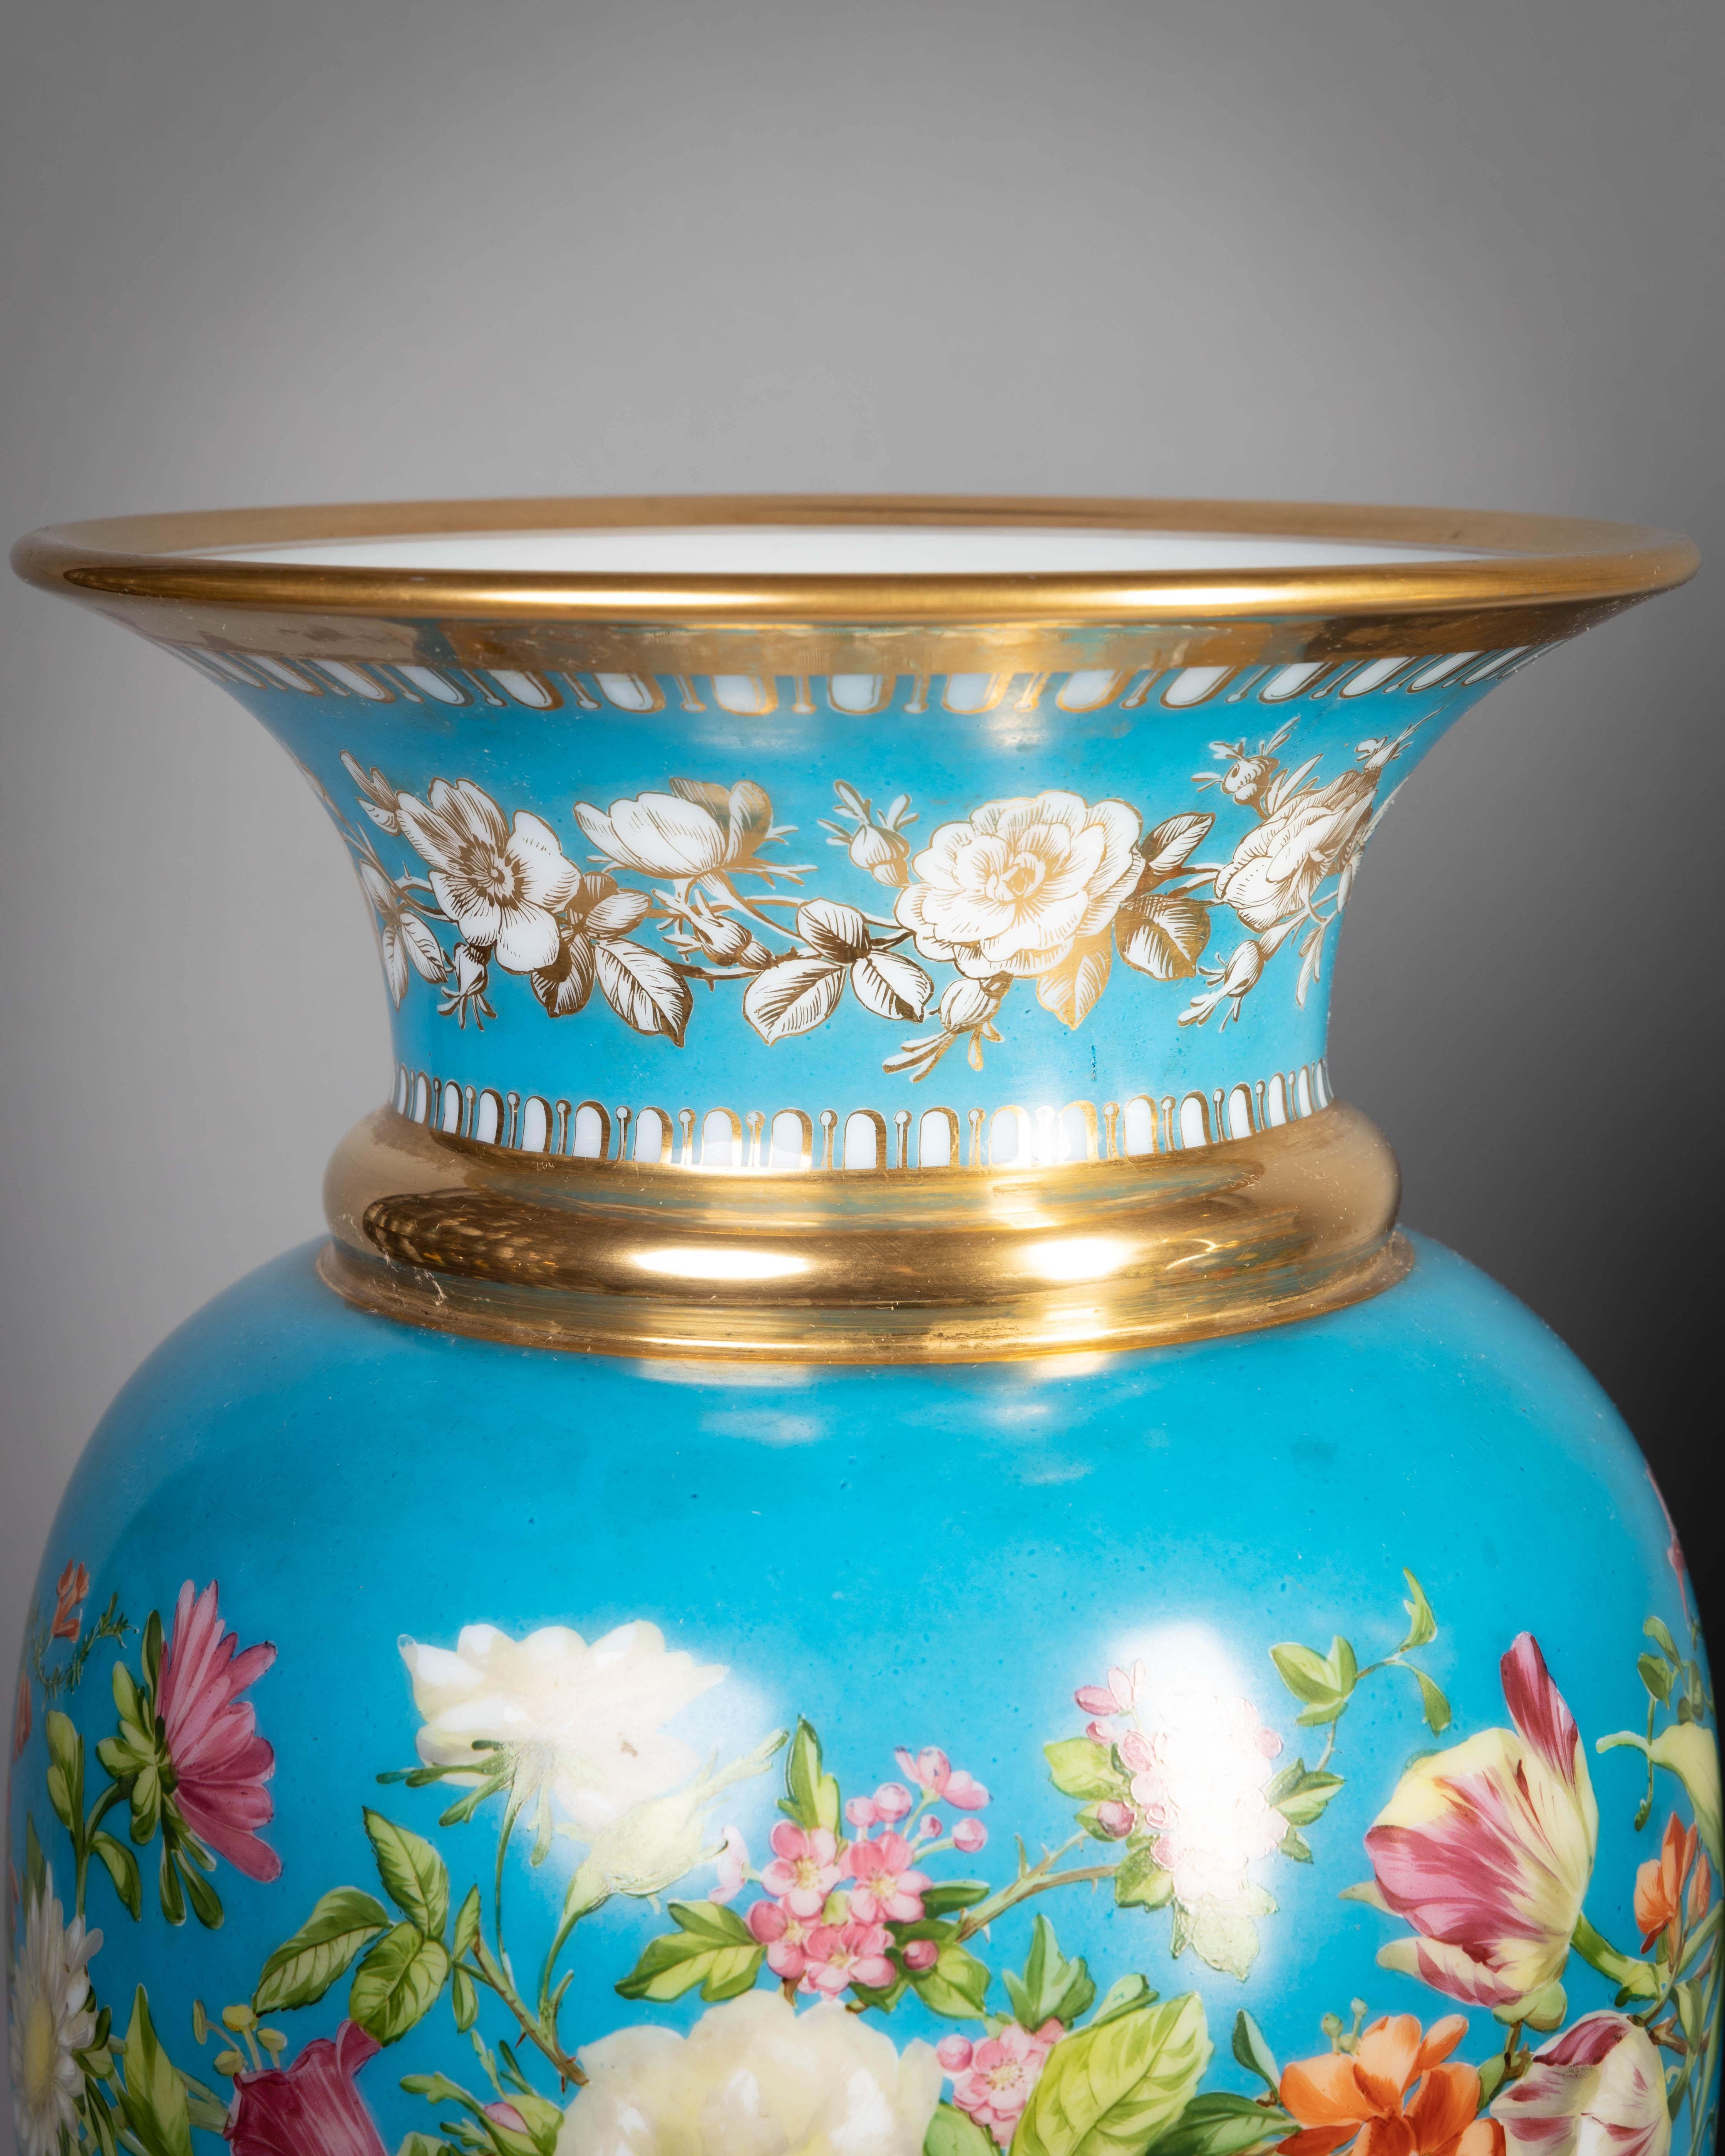 Pair of large French opaline vases, circa 1830.